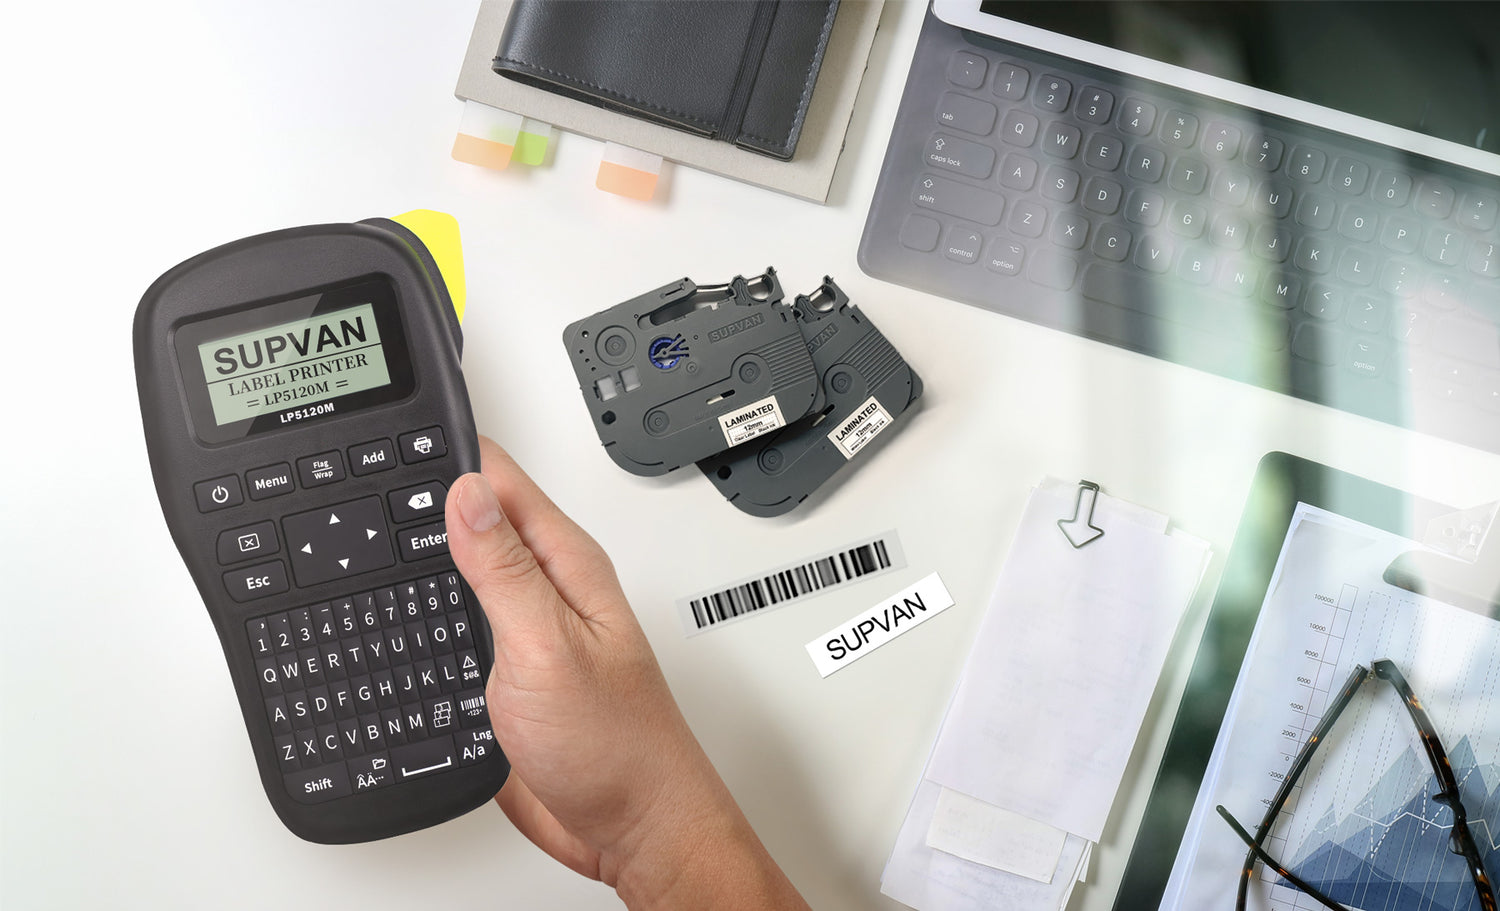 Why Supvan Online Label Maker Is The Best Choice For Labelling Your Household Items?